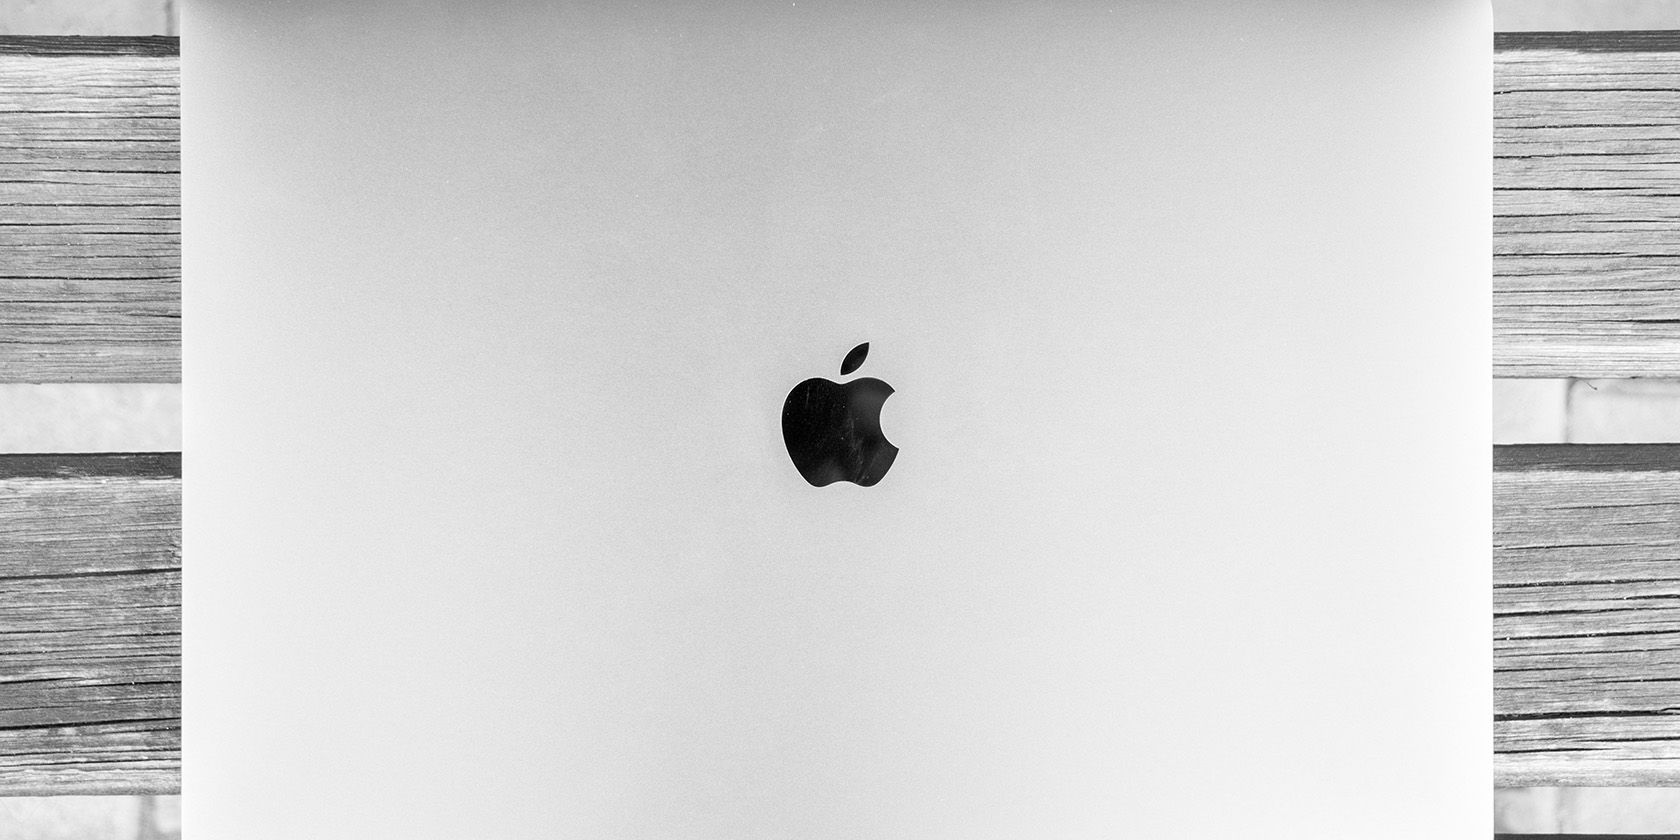 MacBook closed on a tabletop